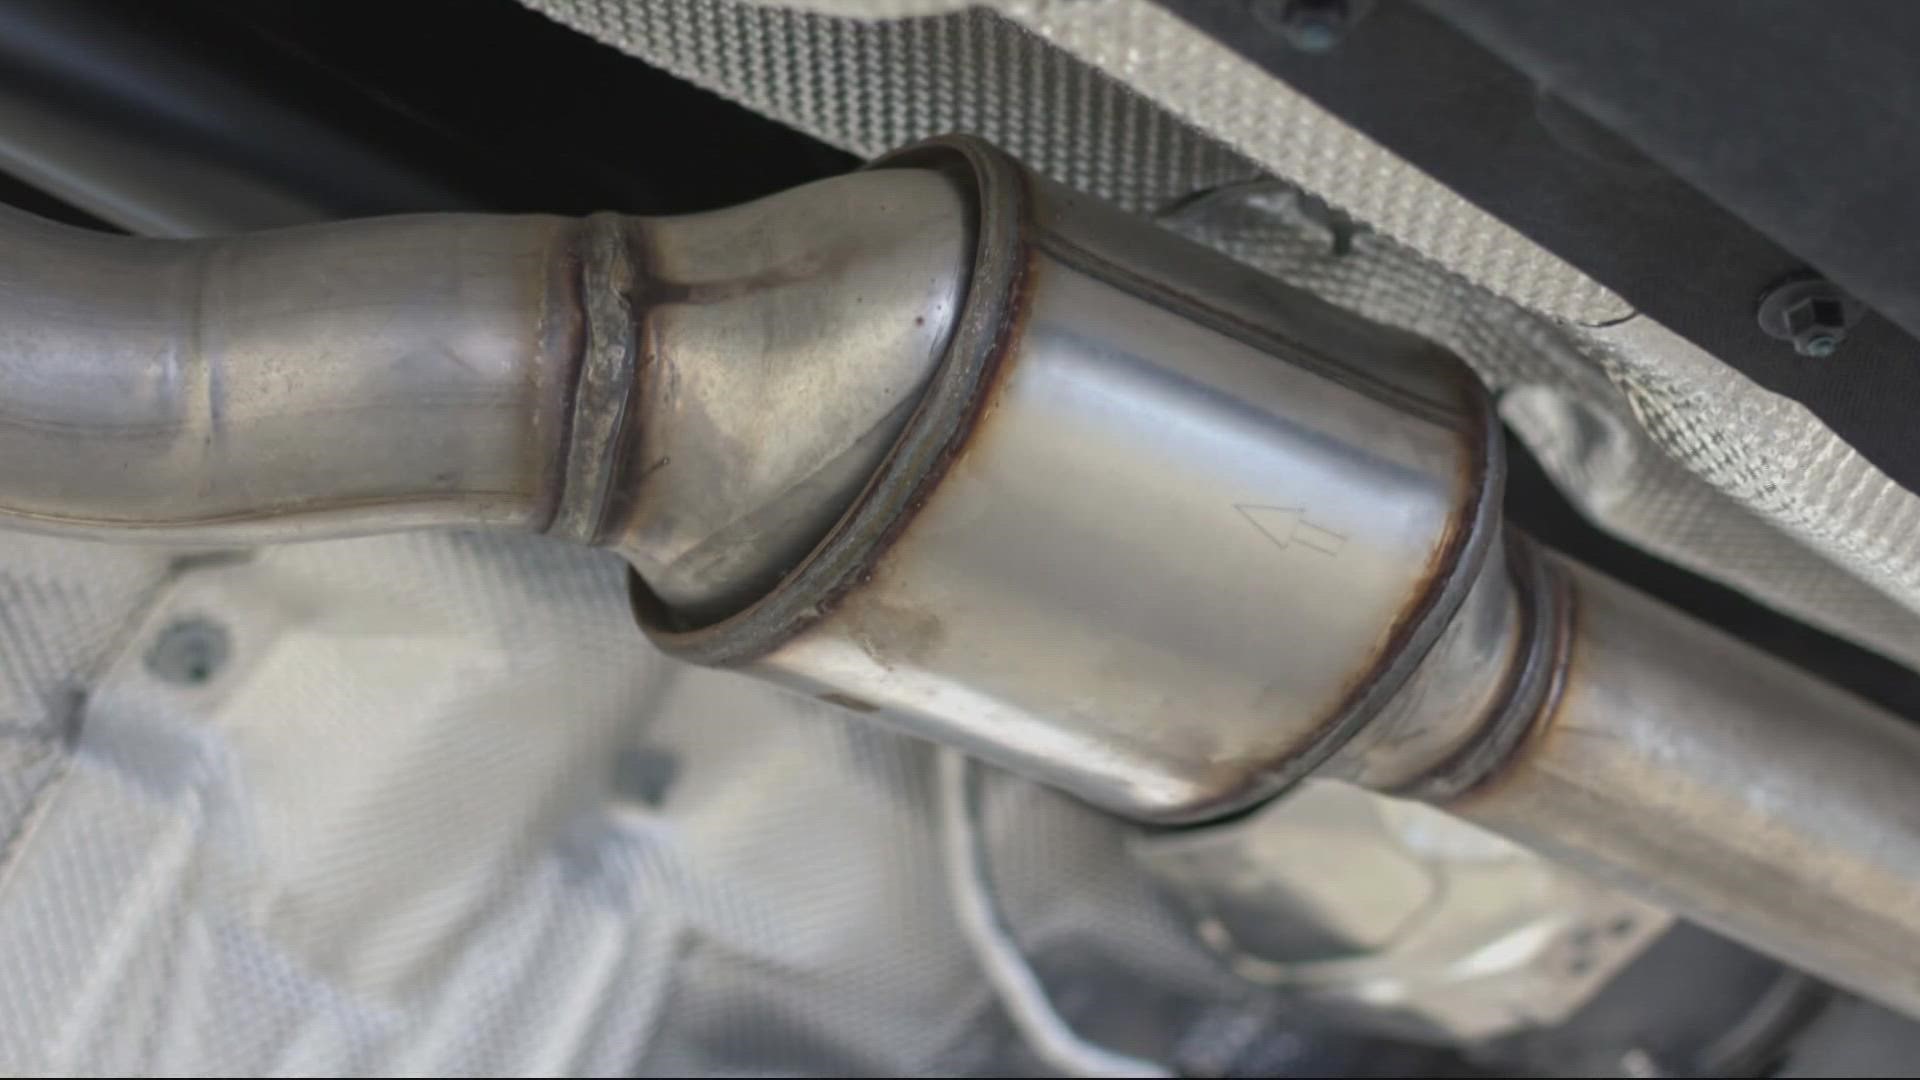 More than 1,700 catalytic converters were stolen in North Portland between August 2021 and August 2022.